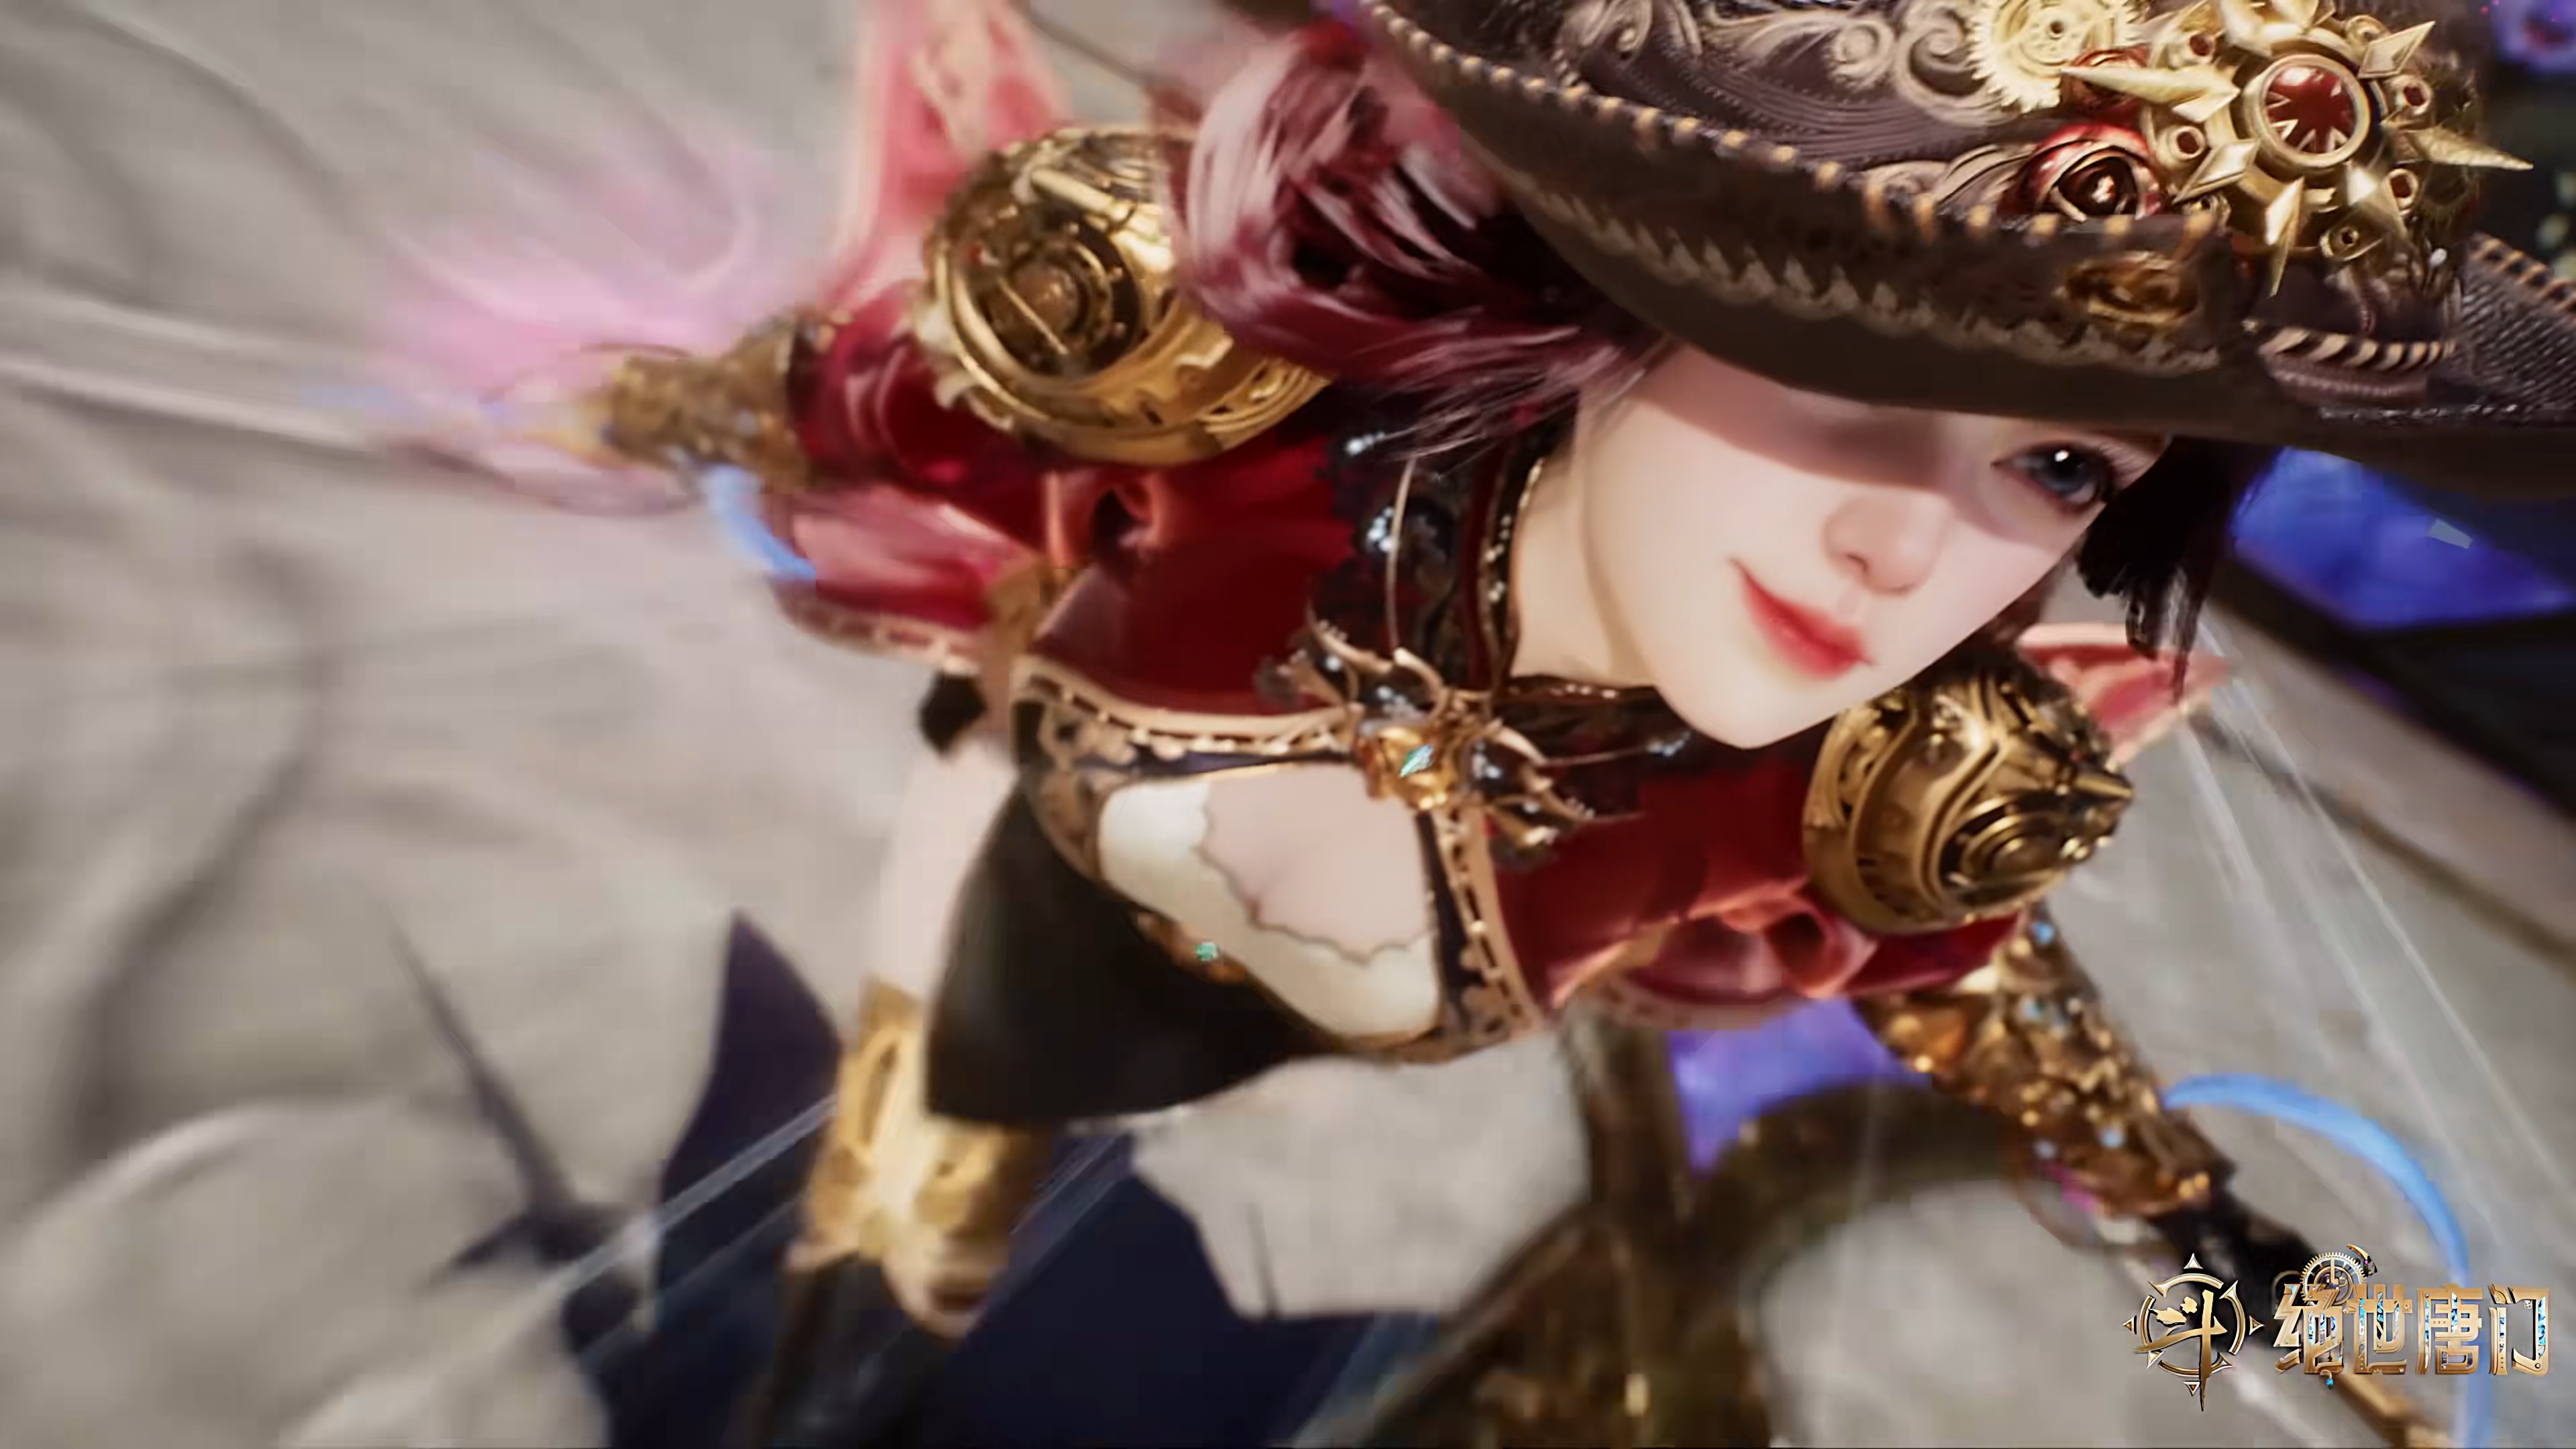 General 3840x2160 Dou Luo Da Lu Jue Shi Tang Men title fantasy girl fantasy art Chinese cartoon CGI hat women with hats motion blur blurred closed mouth smiling one eye obstructed running dual wield weapon sword women with swords looking away blue eyes closeup